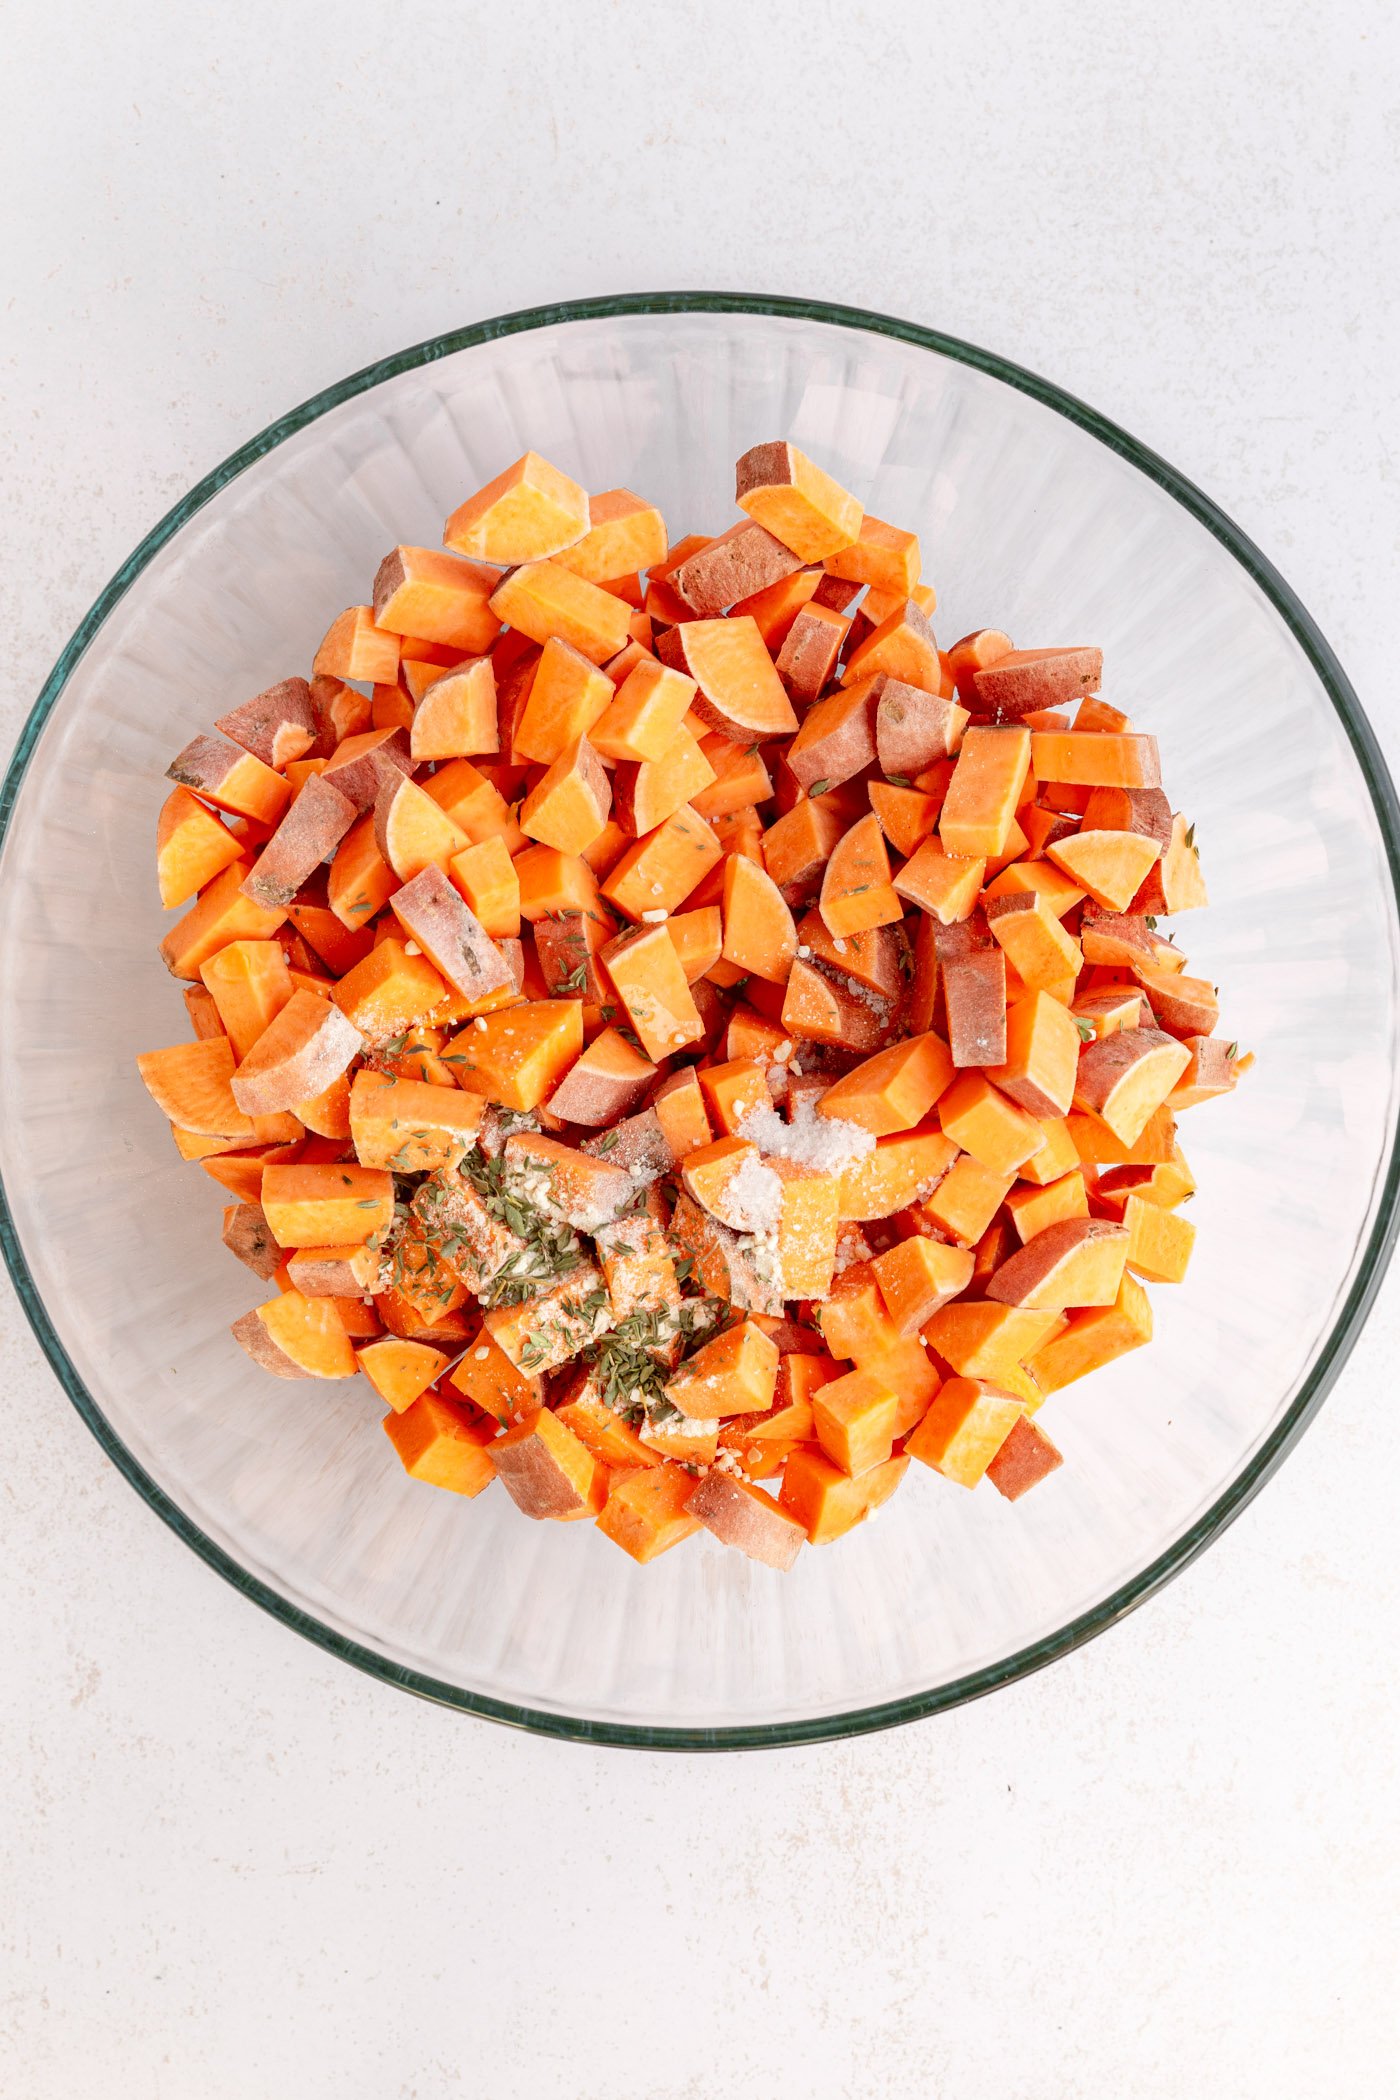 A clear bowl filled with diced sweet potatoes, oil, and seasonings. Bowl is sitting on a white surface.